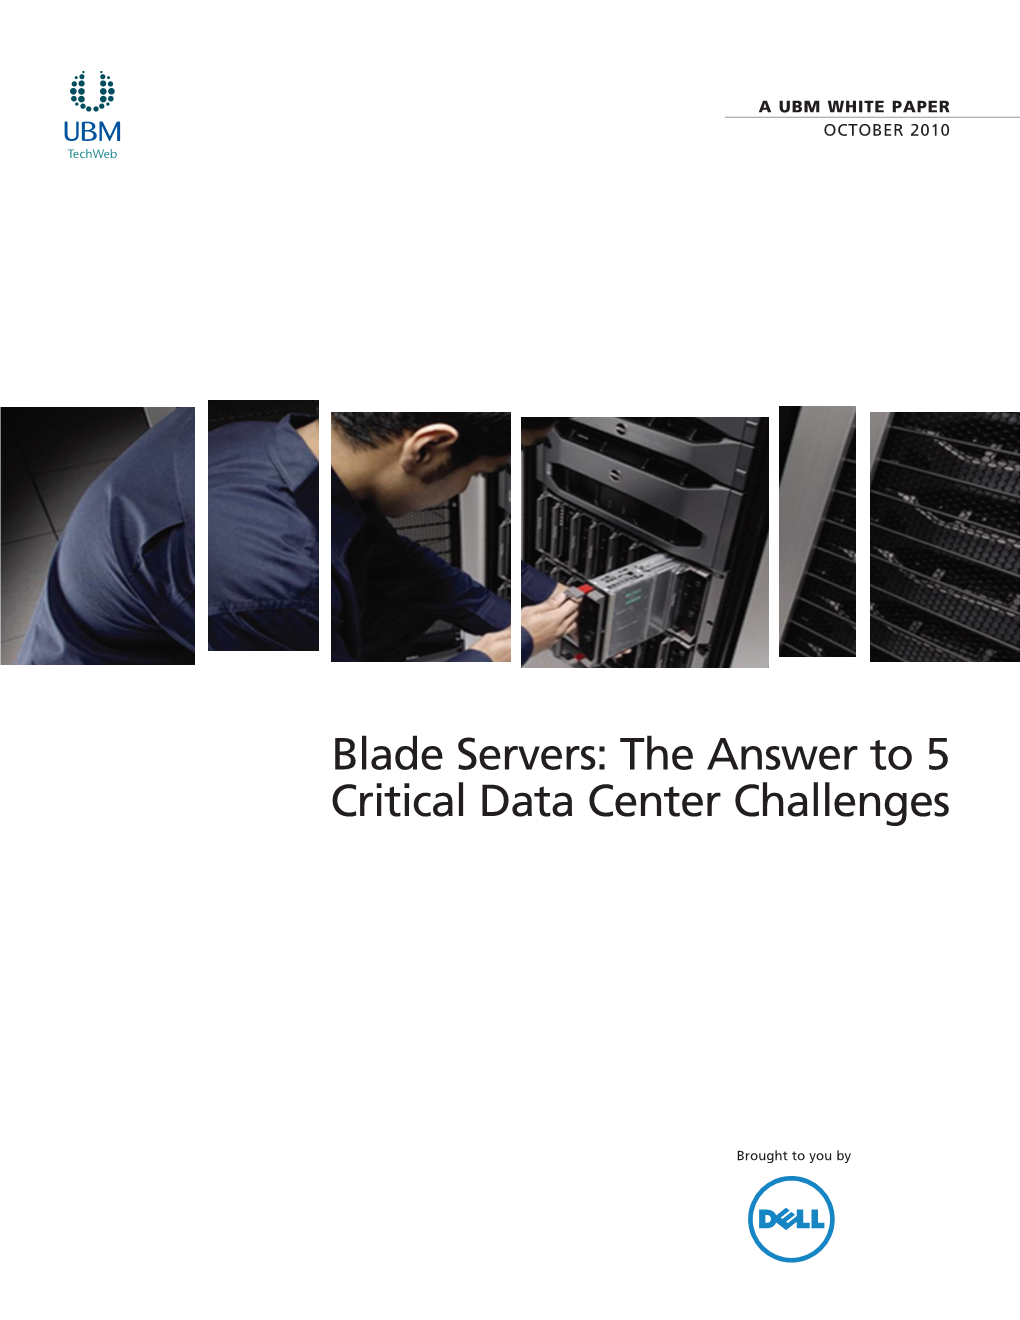 Blade Servers: the Answer to 5 Critical Data Center Challenges